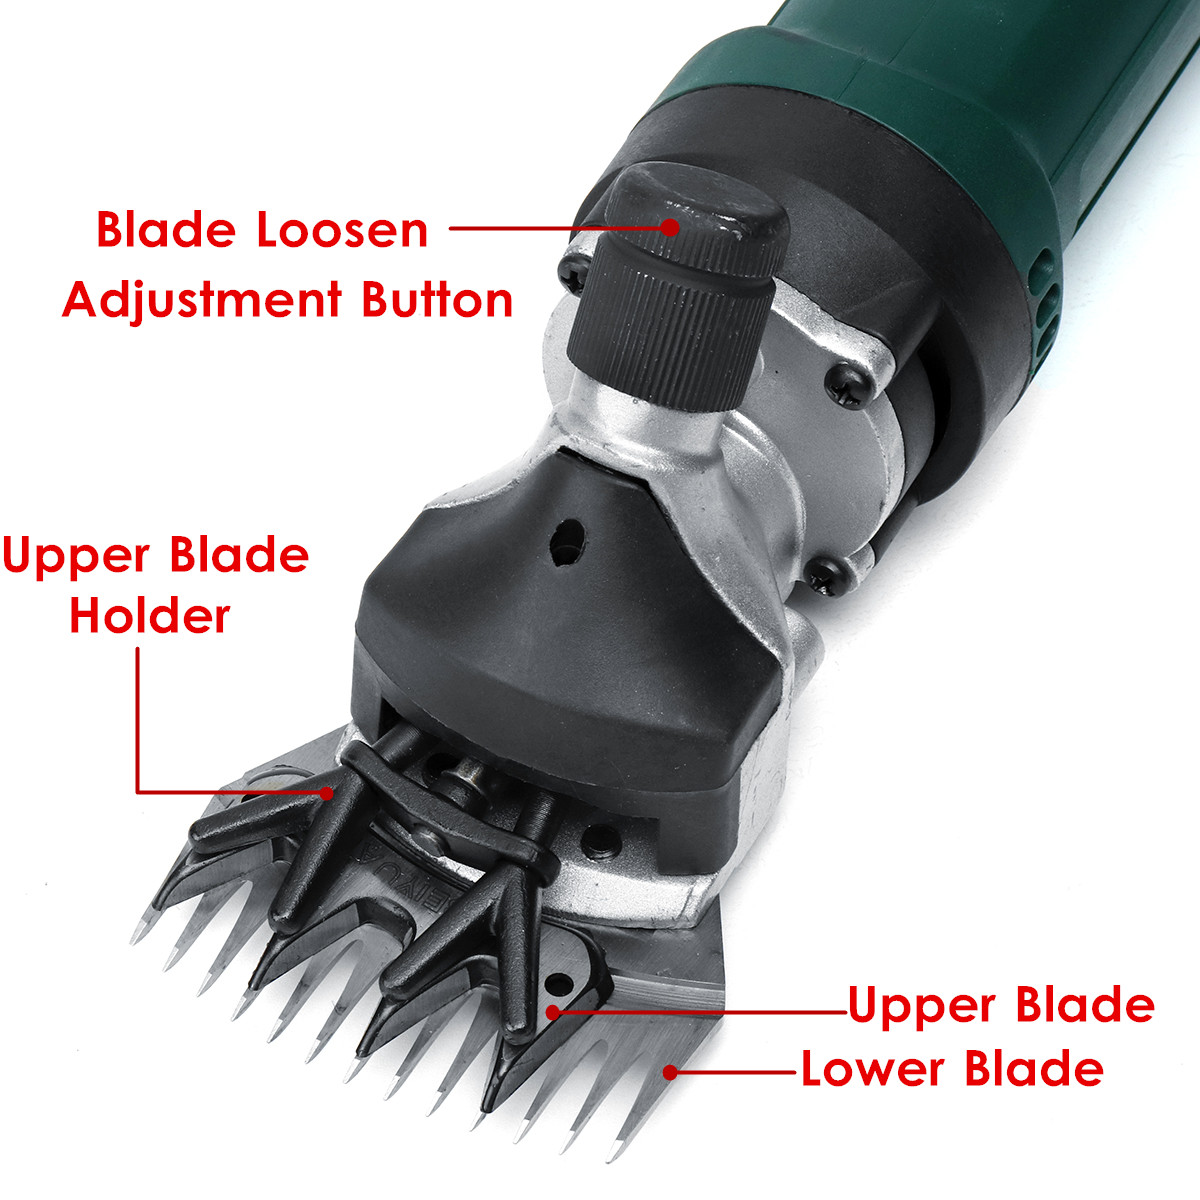 690W-6-Speed-Adjustable-Electric-Sheep-Shearing-Clipper-Shears-Goats-Hair-Removal-Trimmer-1323344-8